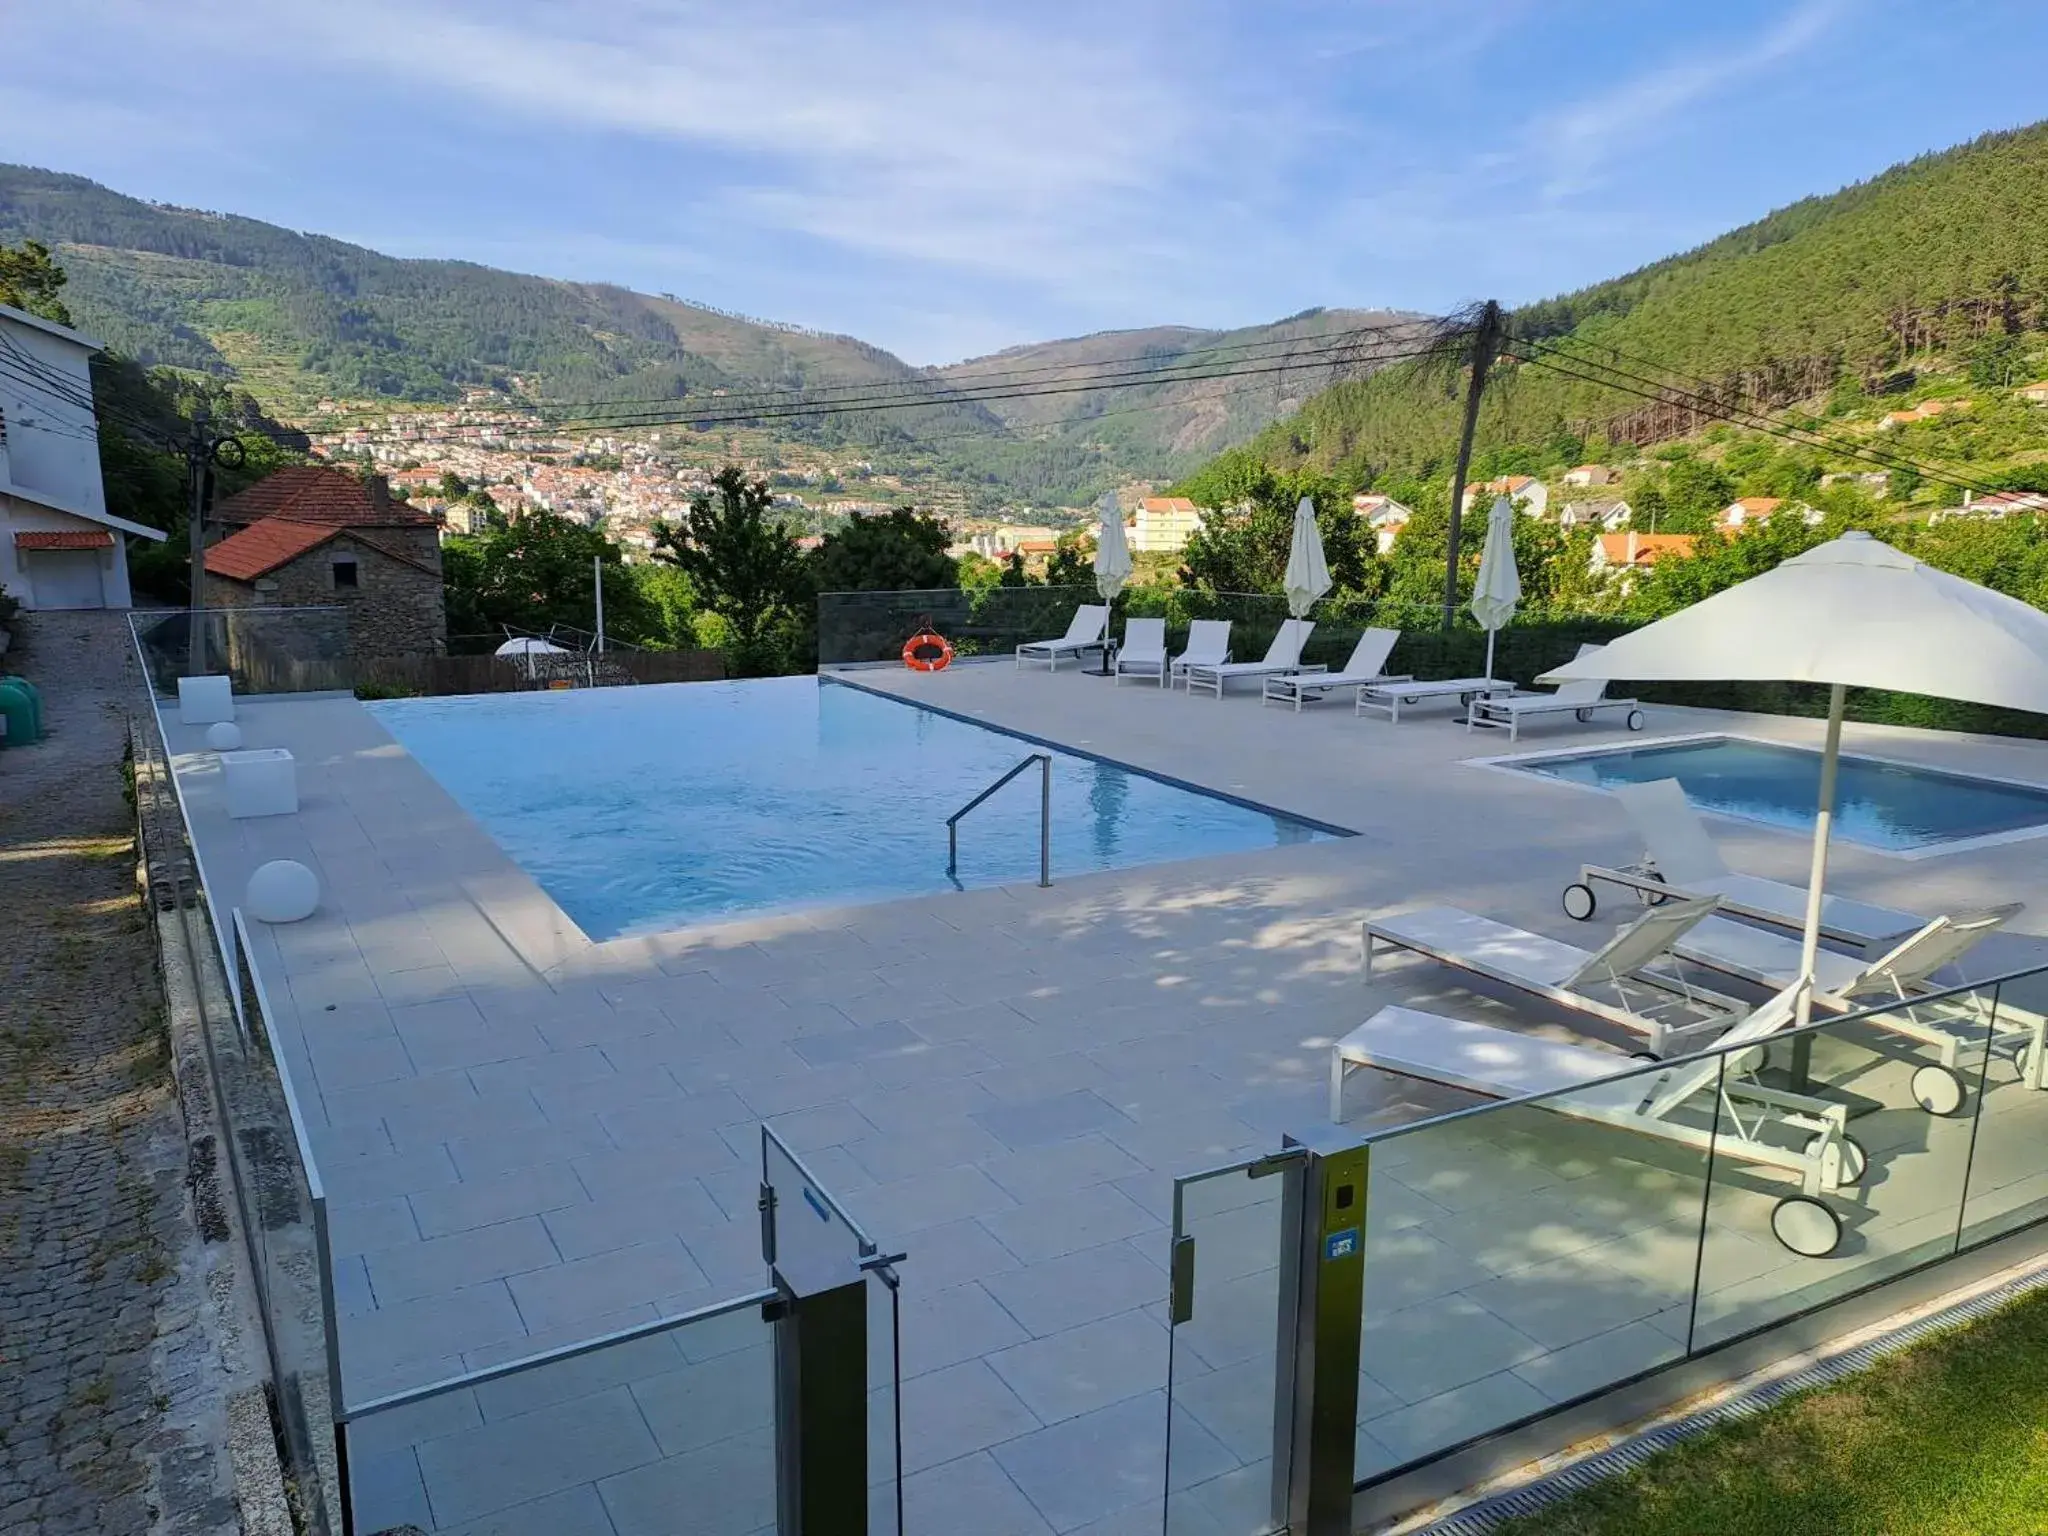 Off site, Swimming Pool in Inatel Manteigas